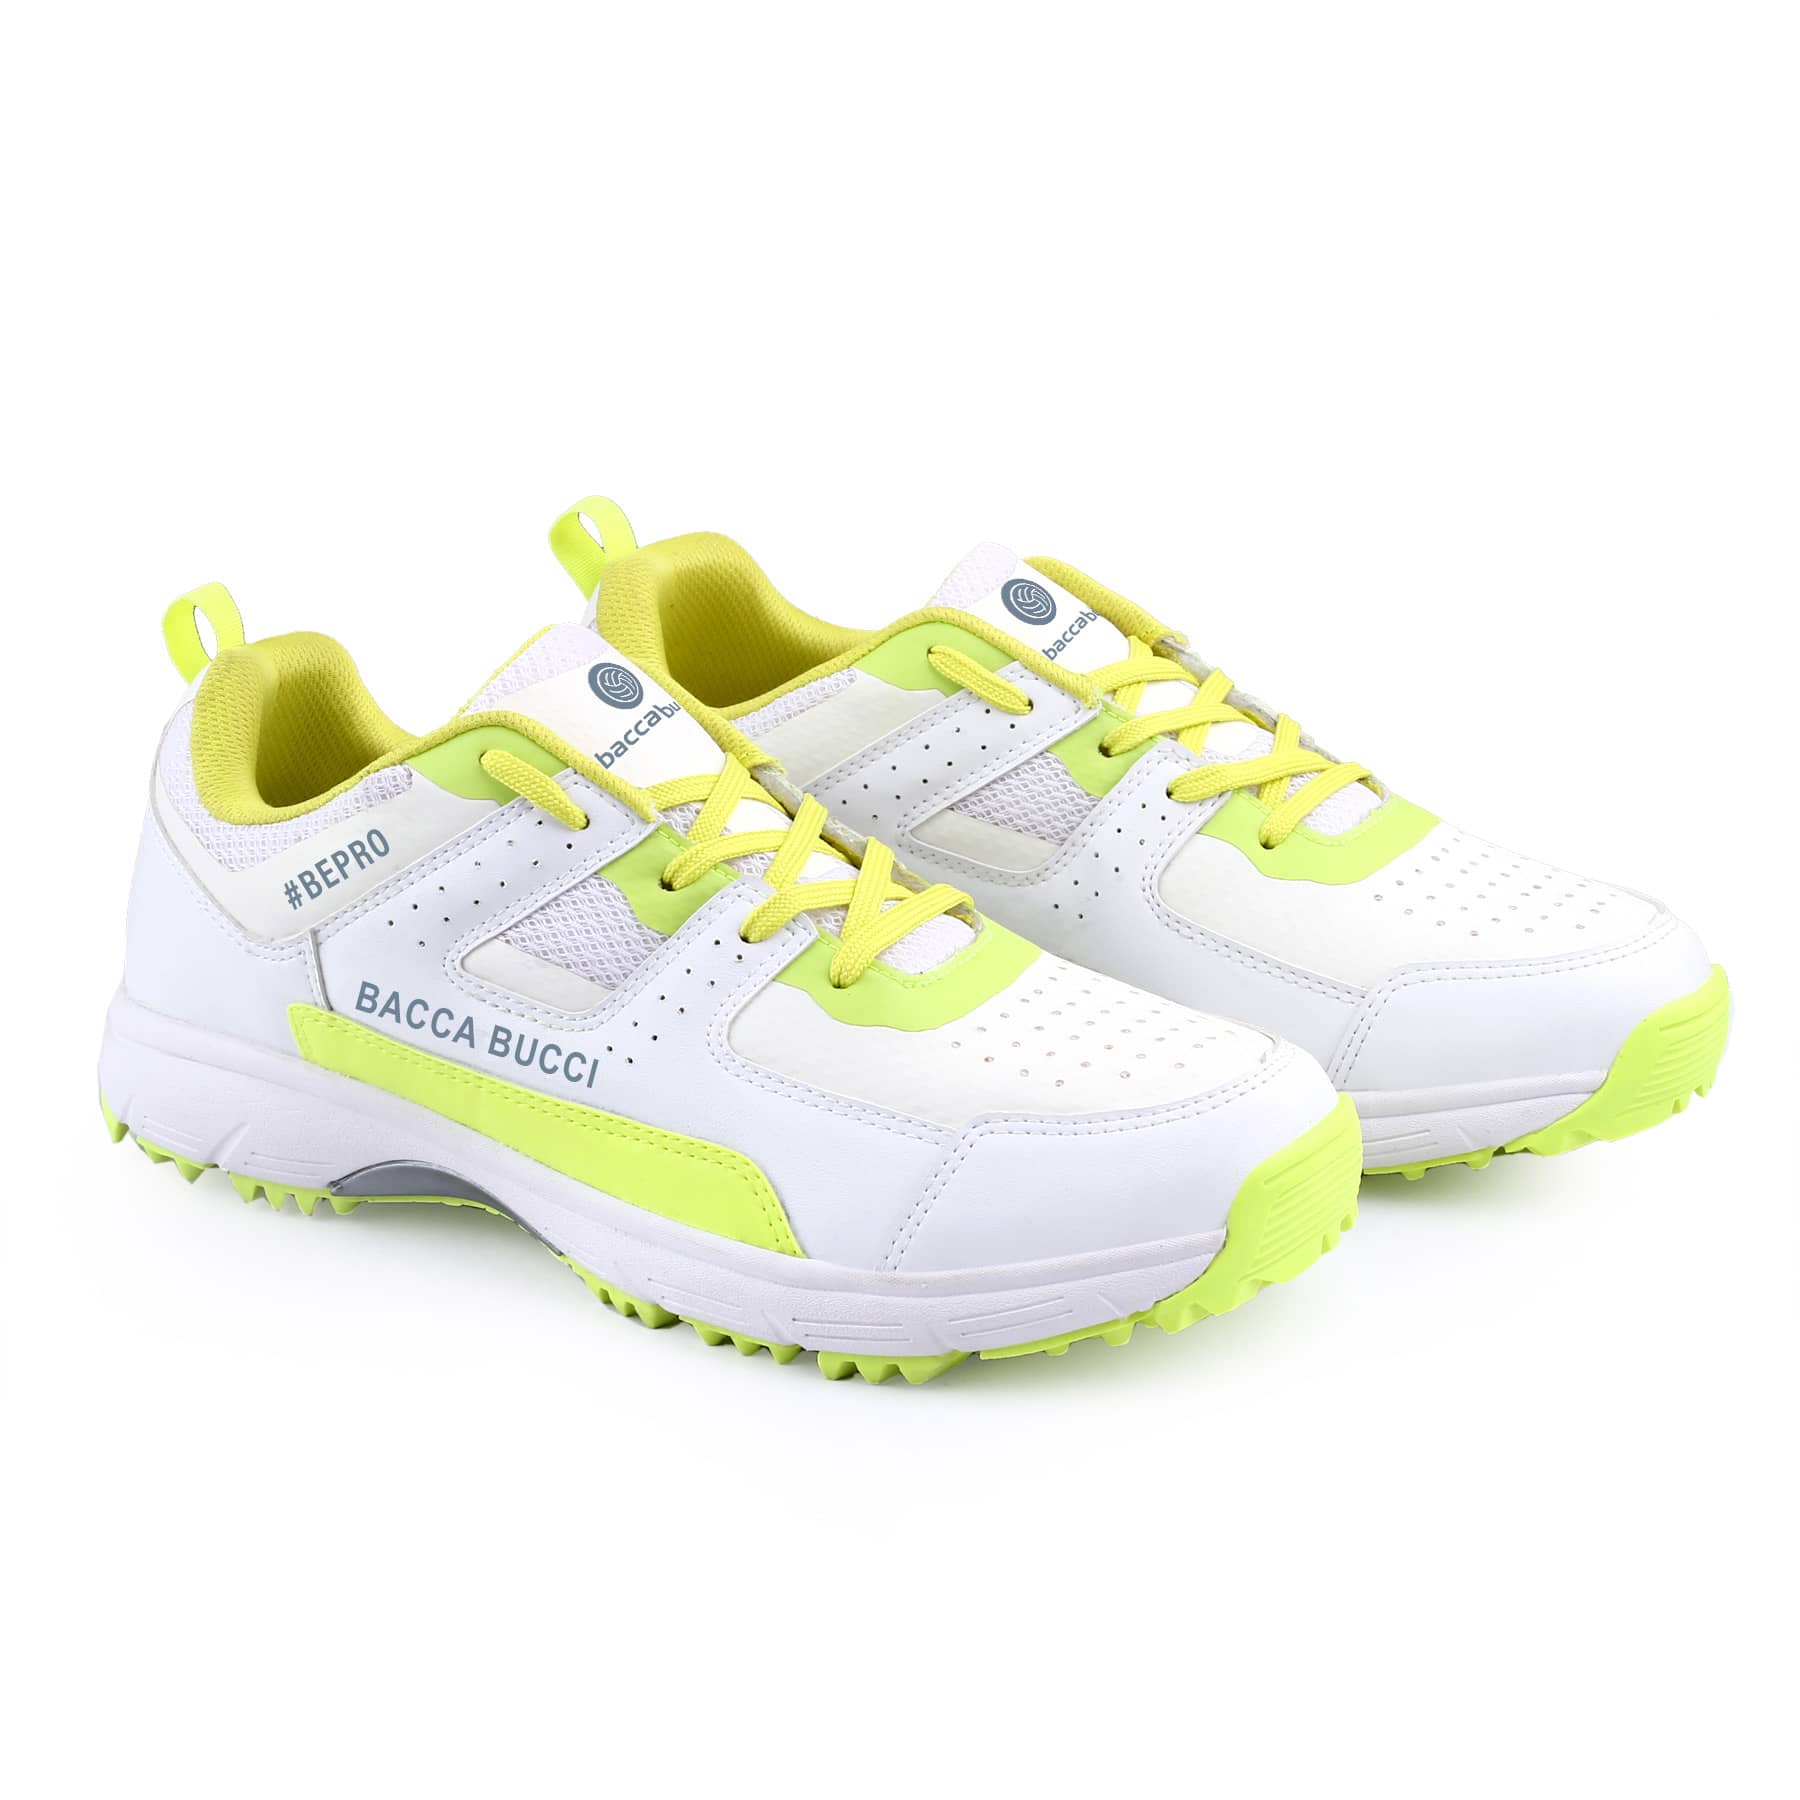 Bacca Bucci WicketWings Pro Performance Cricket Shoes: Dynamic FlexFit Design, Superior Traction Cleats, Breathable Perforated Upper